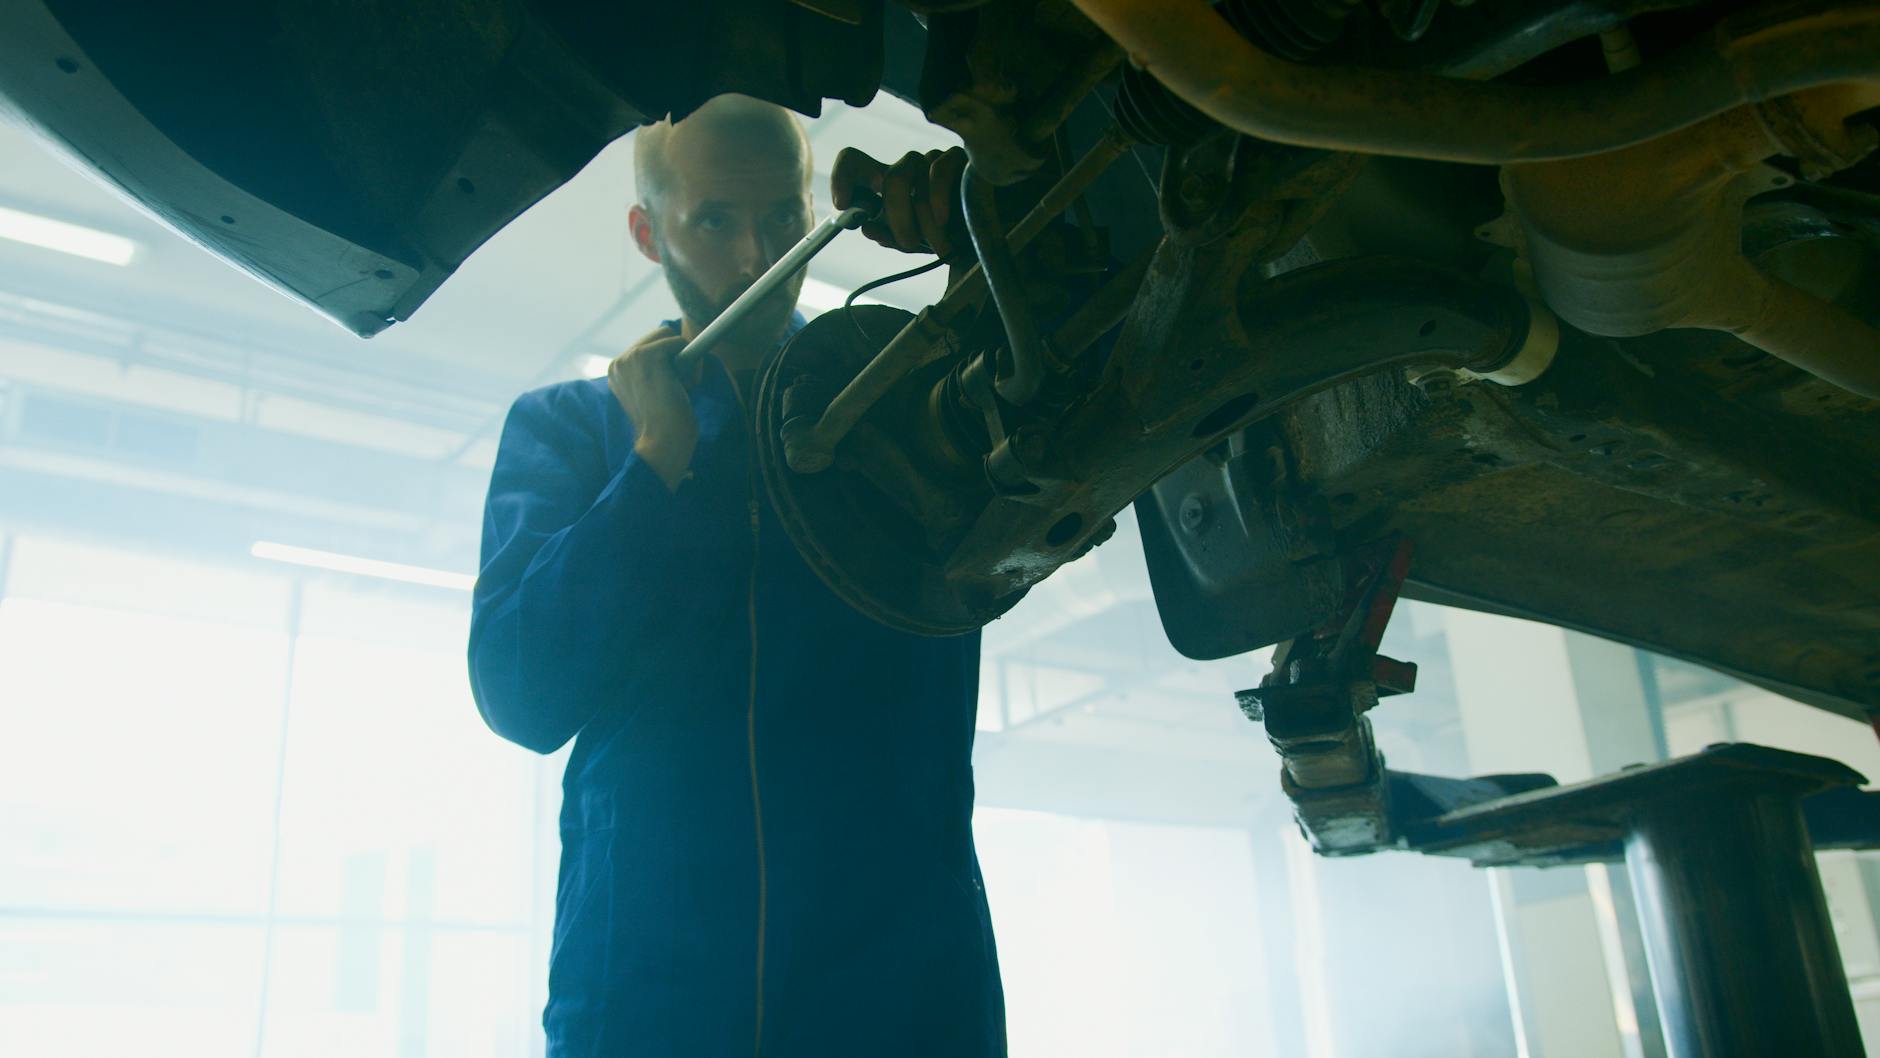 A Mechanic Holding a Tool Near and a Vehicle